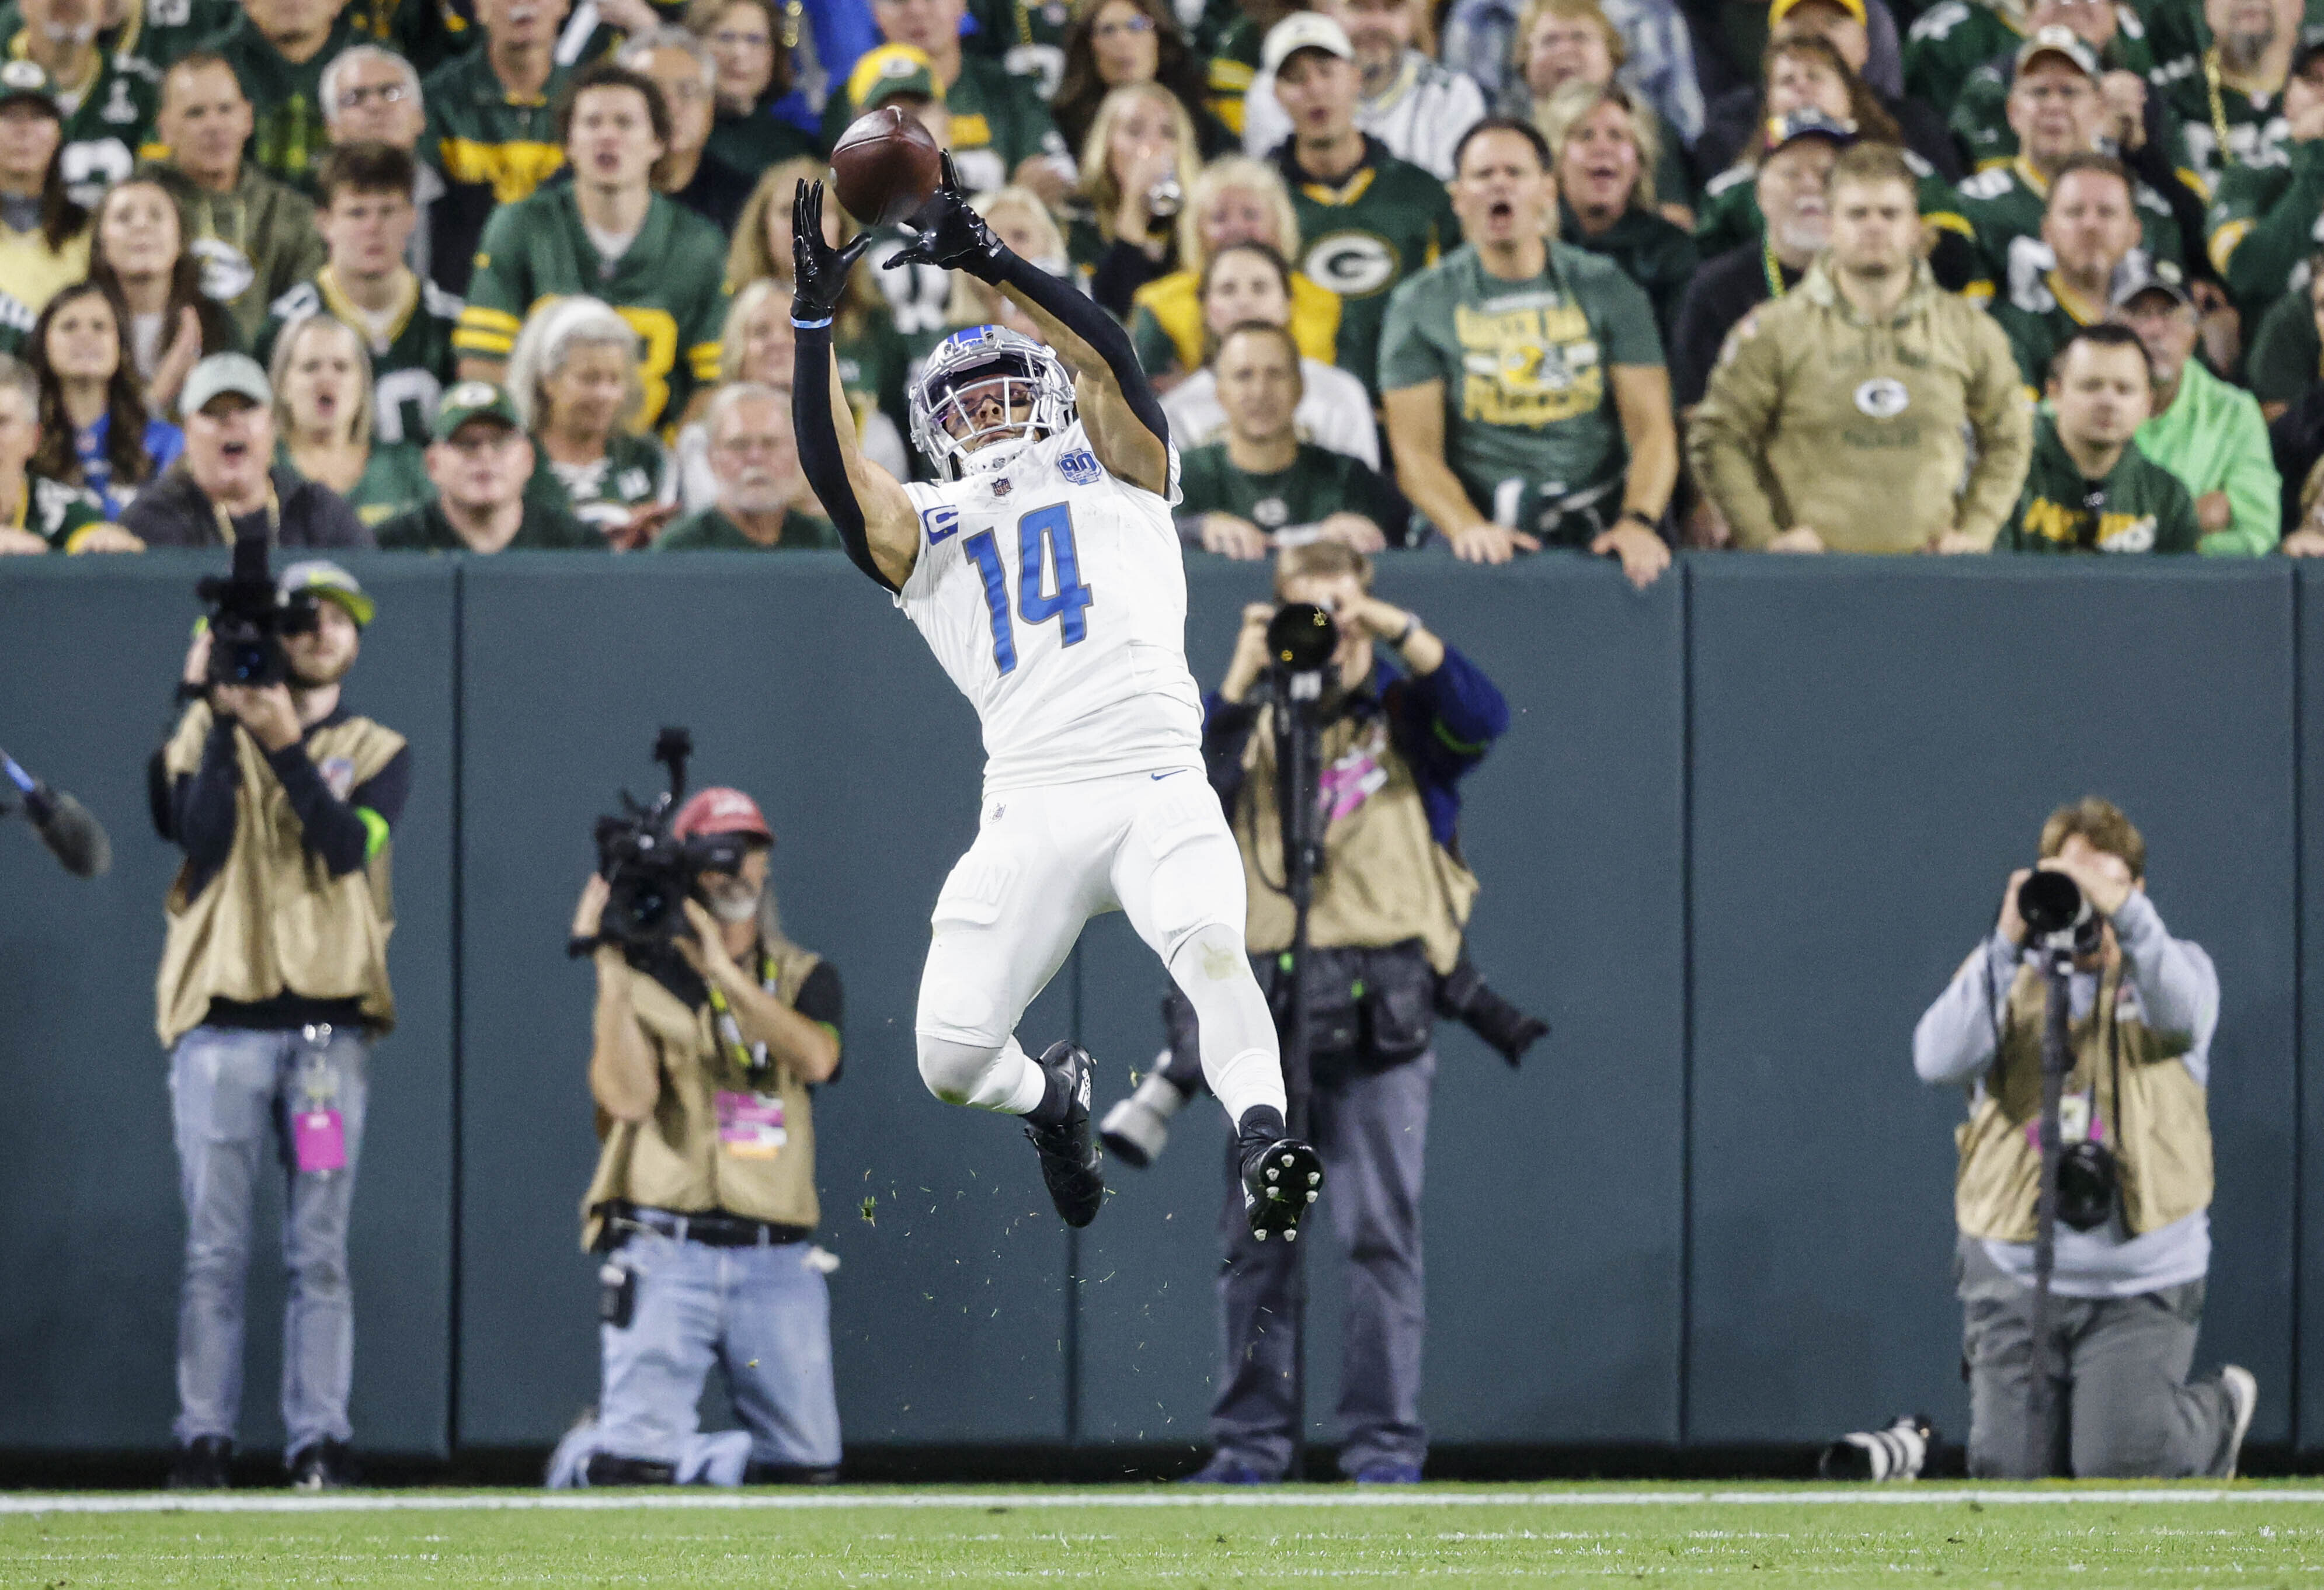 David Montgomery helps Lions top Packers, move into first in NFC North